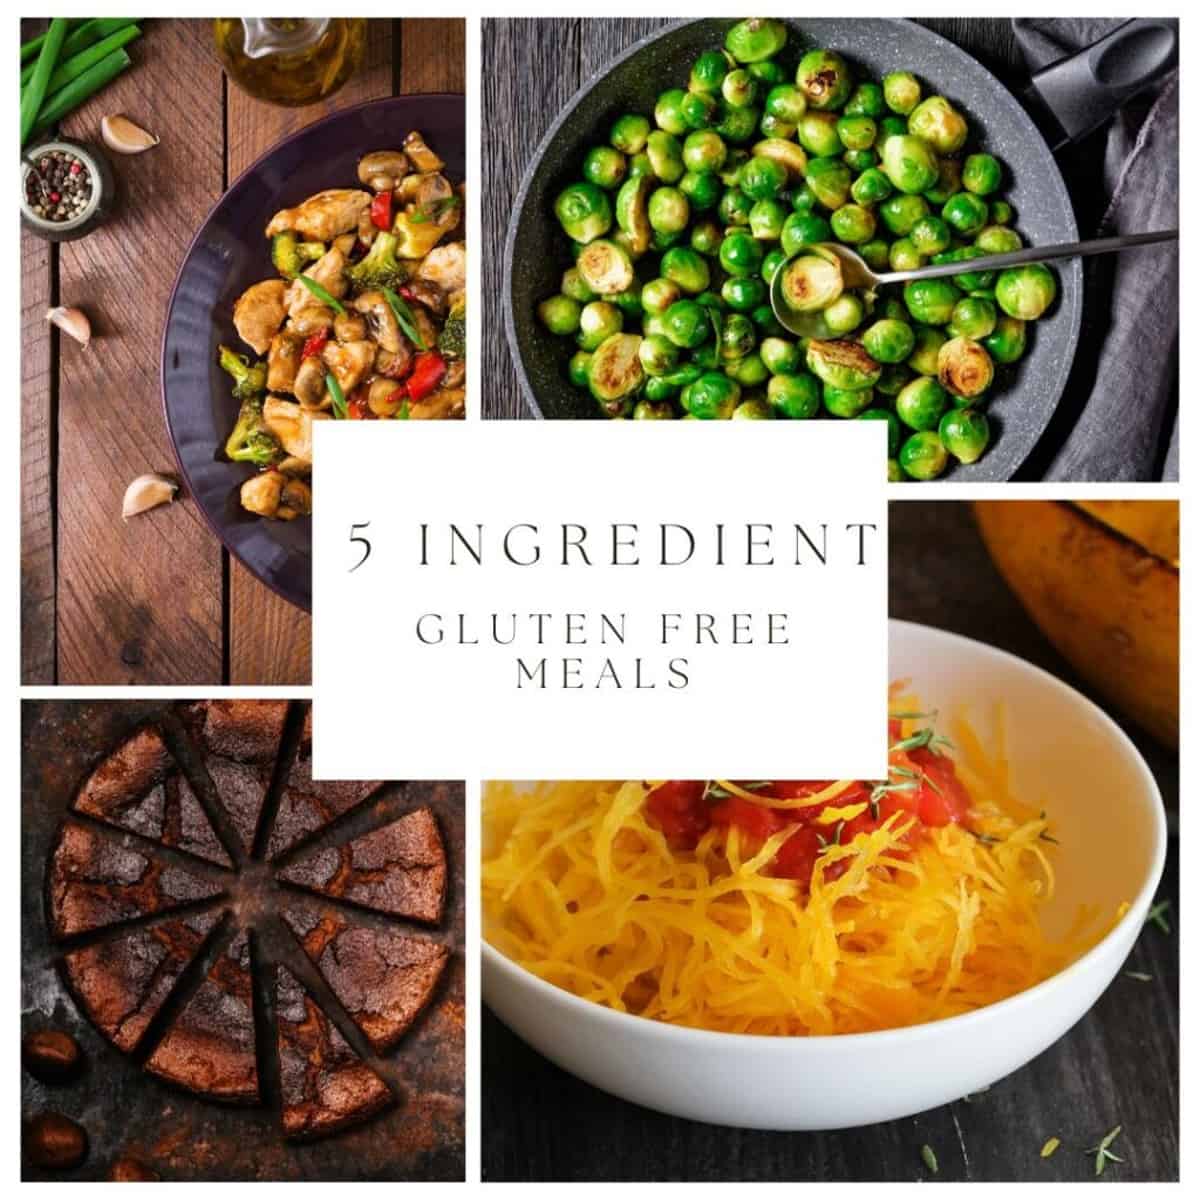 Five 5-ingredient gluten-free meals: Gluten-Free Chicken Stir-Fry, Gluten-Free Spaghetti Squash with Bolognese Sauce, Gluten-Free Turkey Burgers with Sweet Potato Fries, Gluten-Free Salmon with Roasted Vegetables, and Gluten-Free Chicken Tacos with Avocado Salsa.